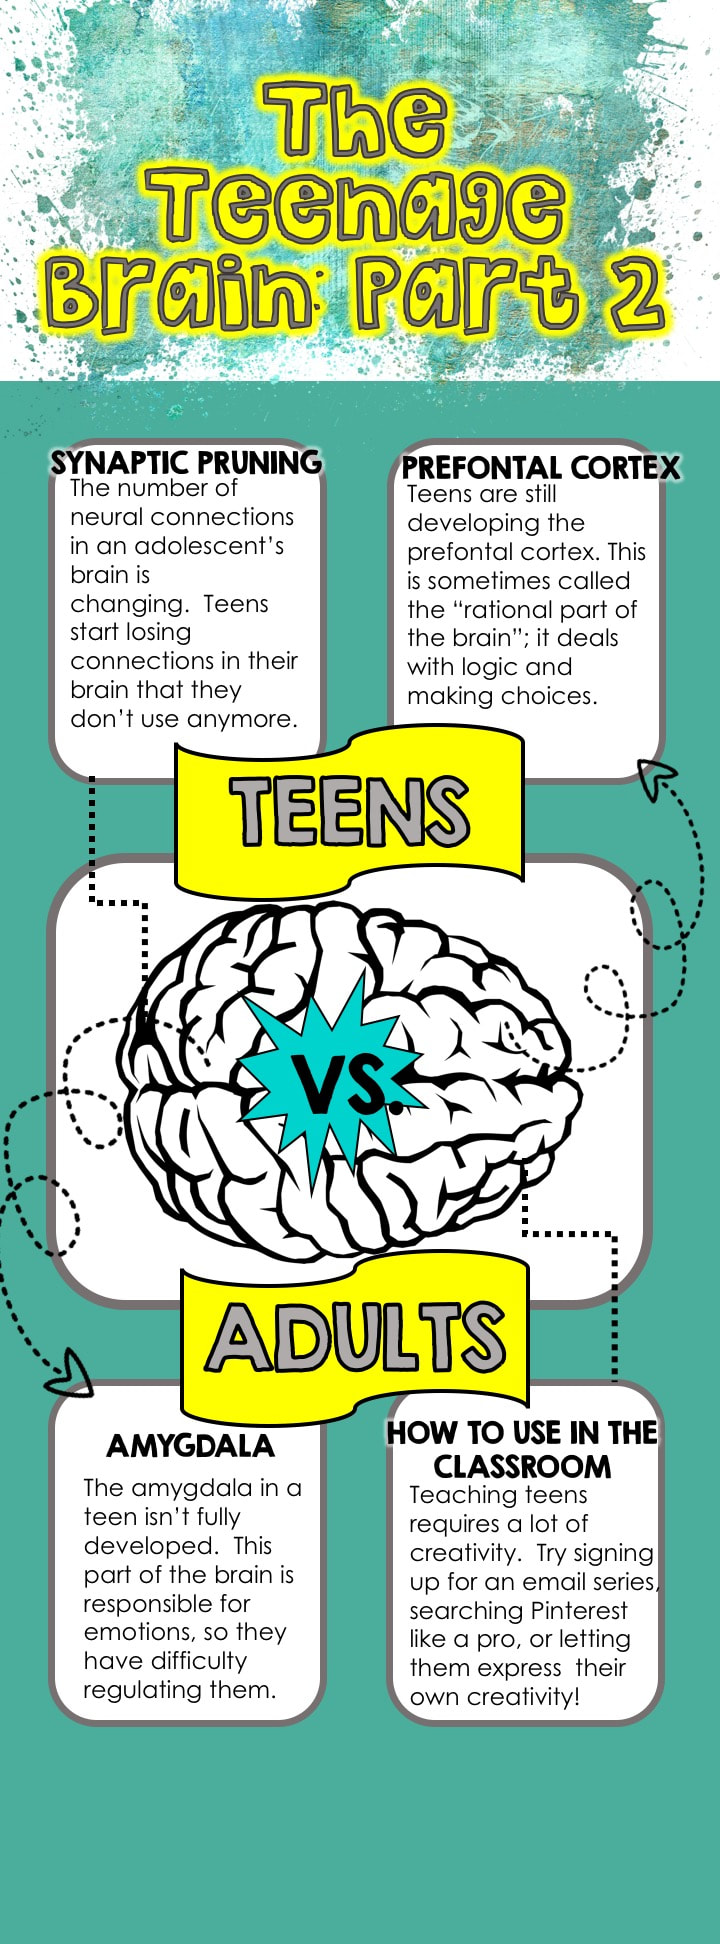 Why teen brains are different, and how to teach teenagers more effectively with this research on teen vs. adult brain development